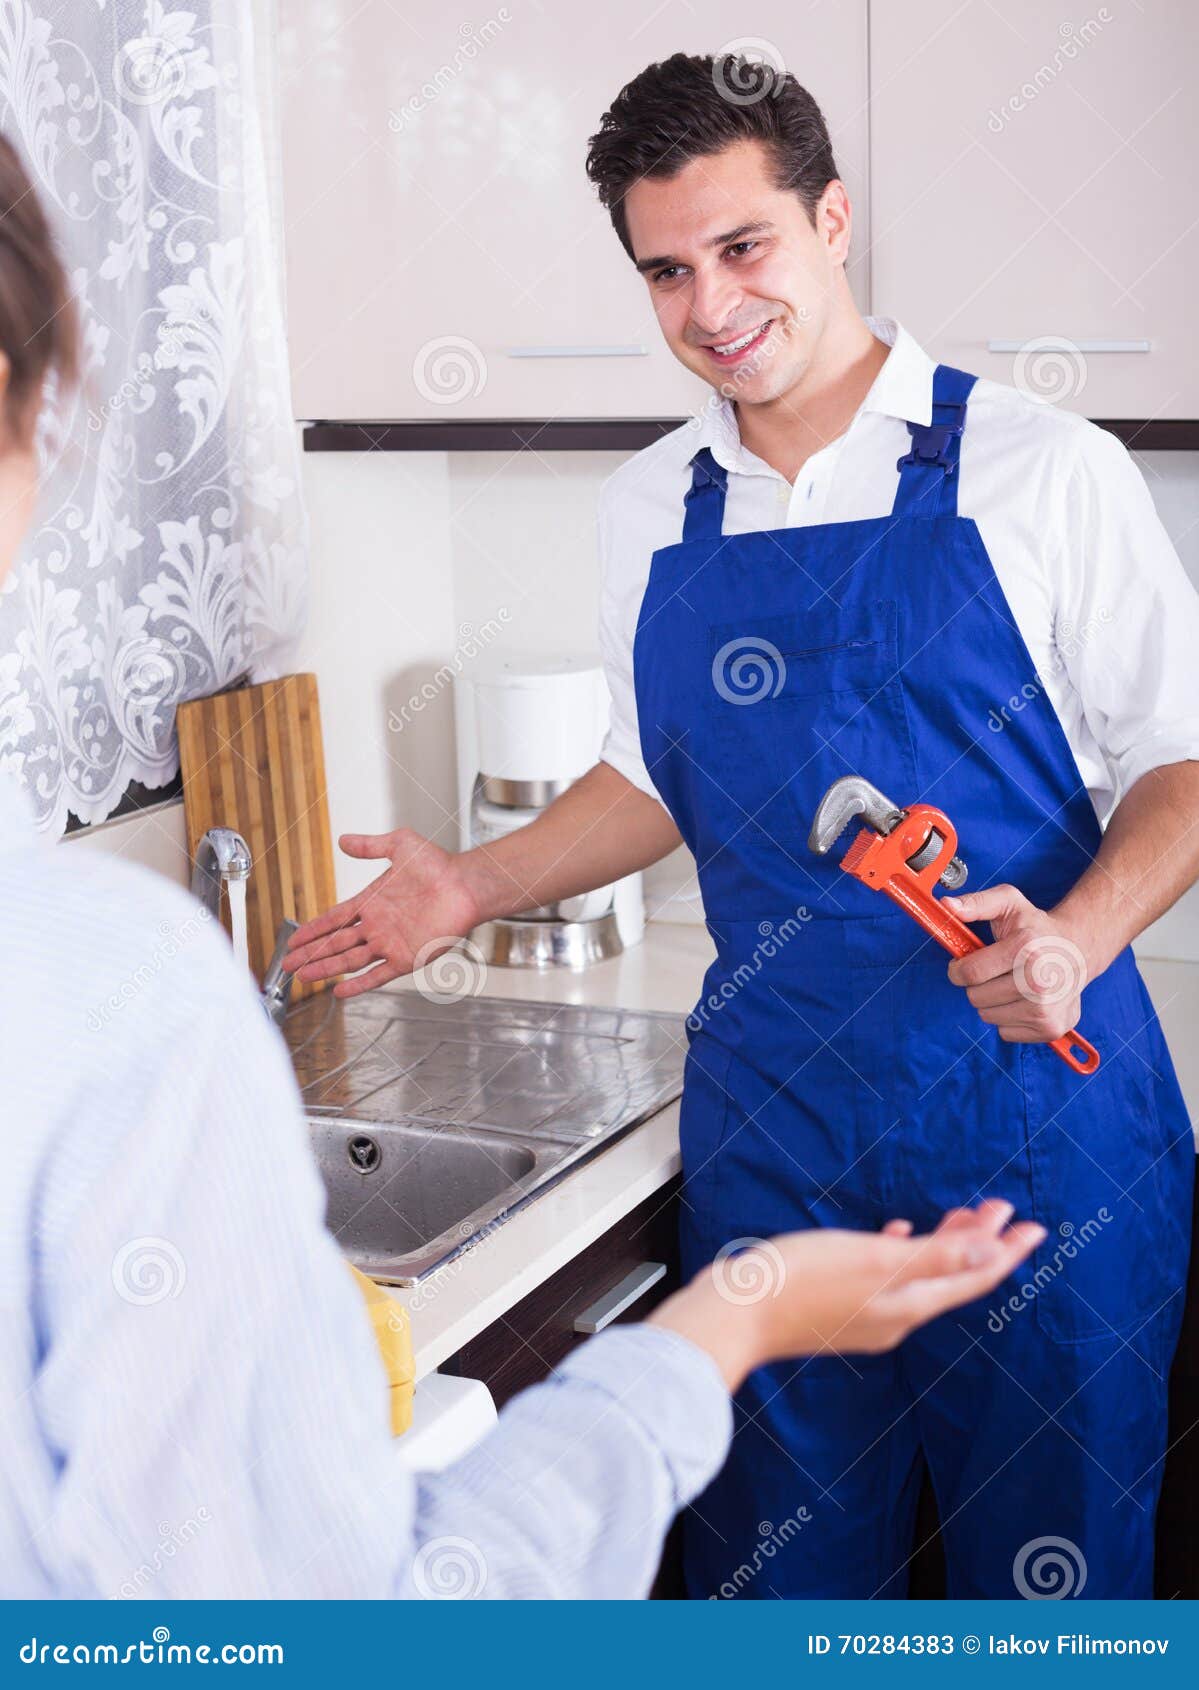 Housewife Called Professional Plumber with Tools To Change Bib image pic image